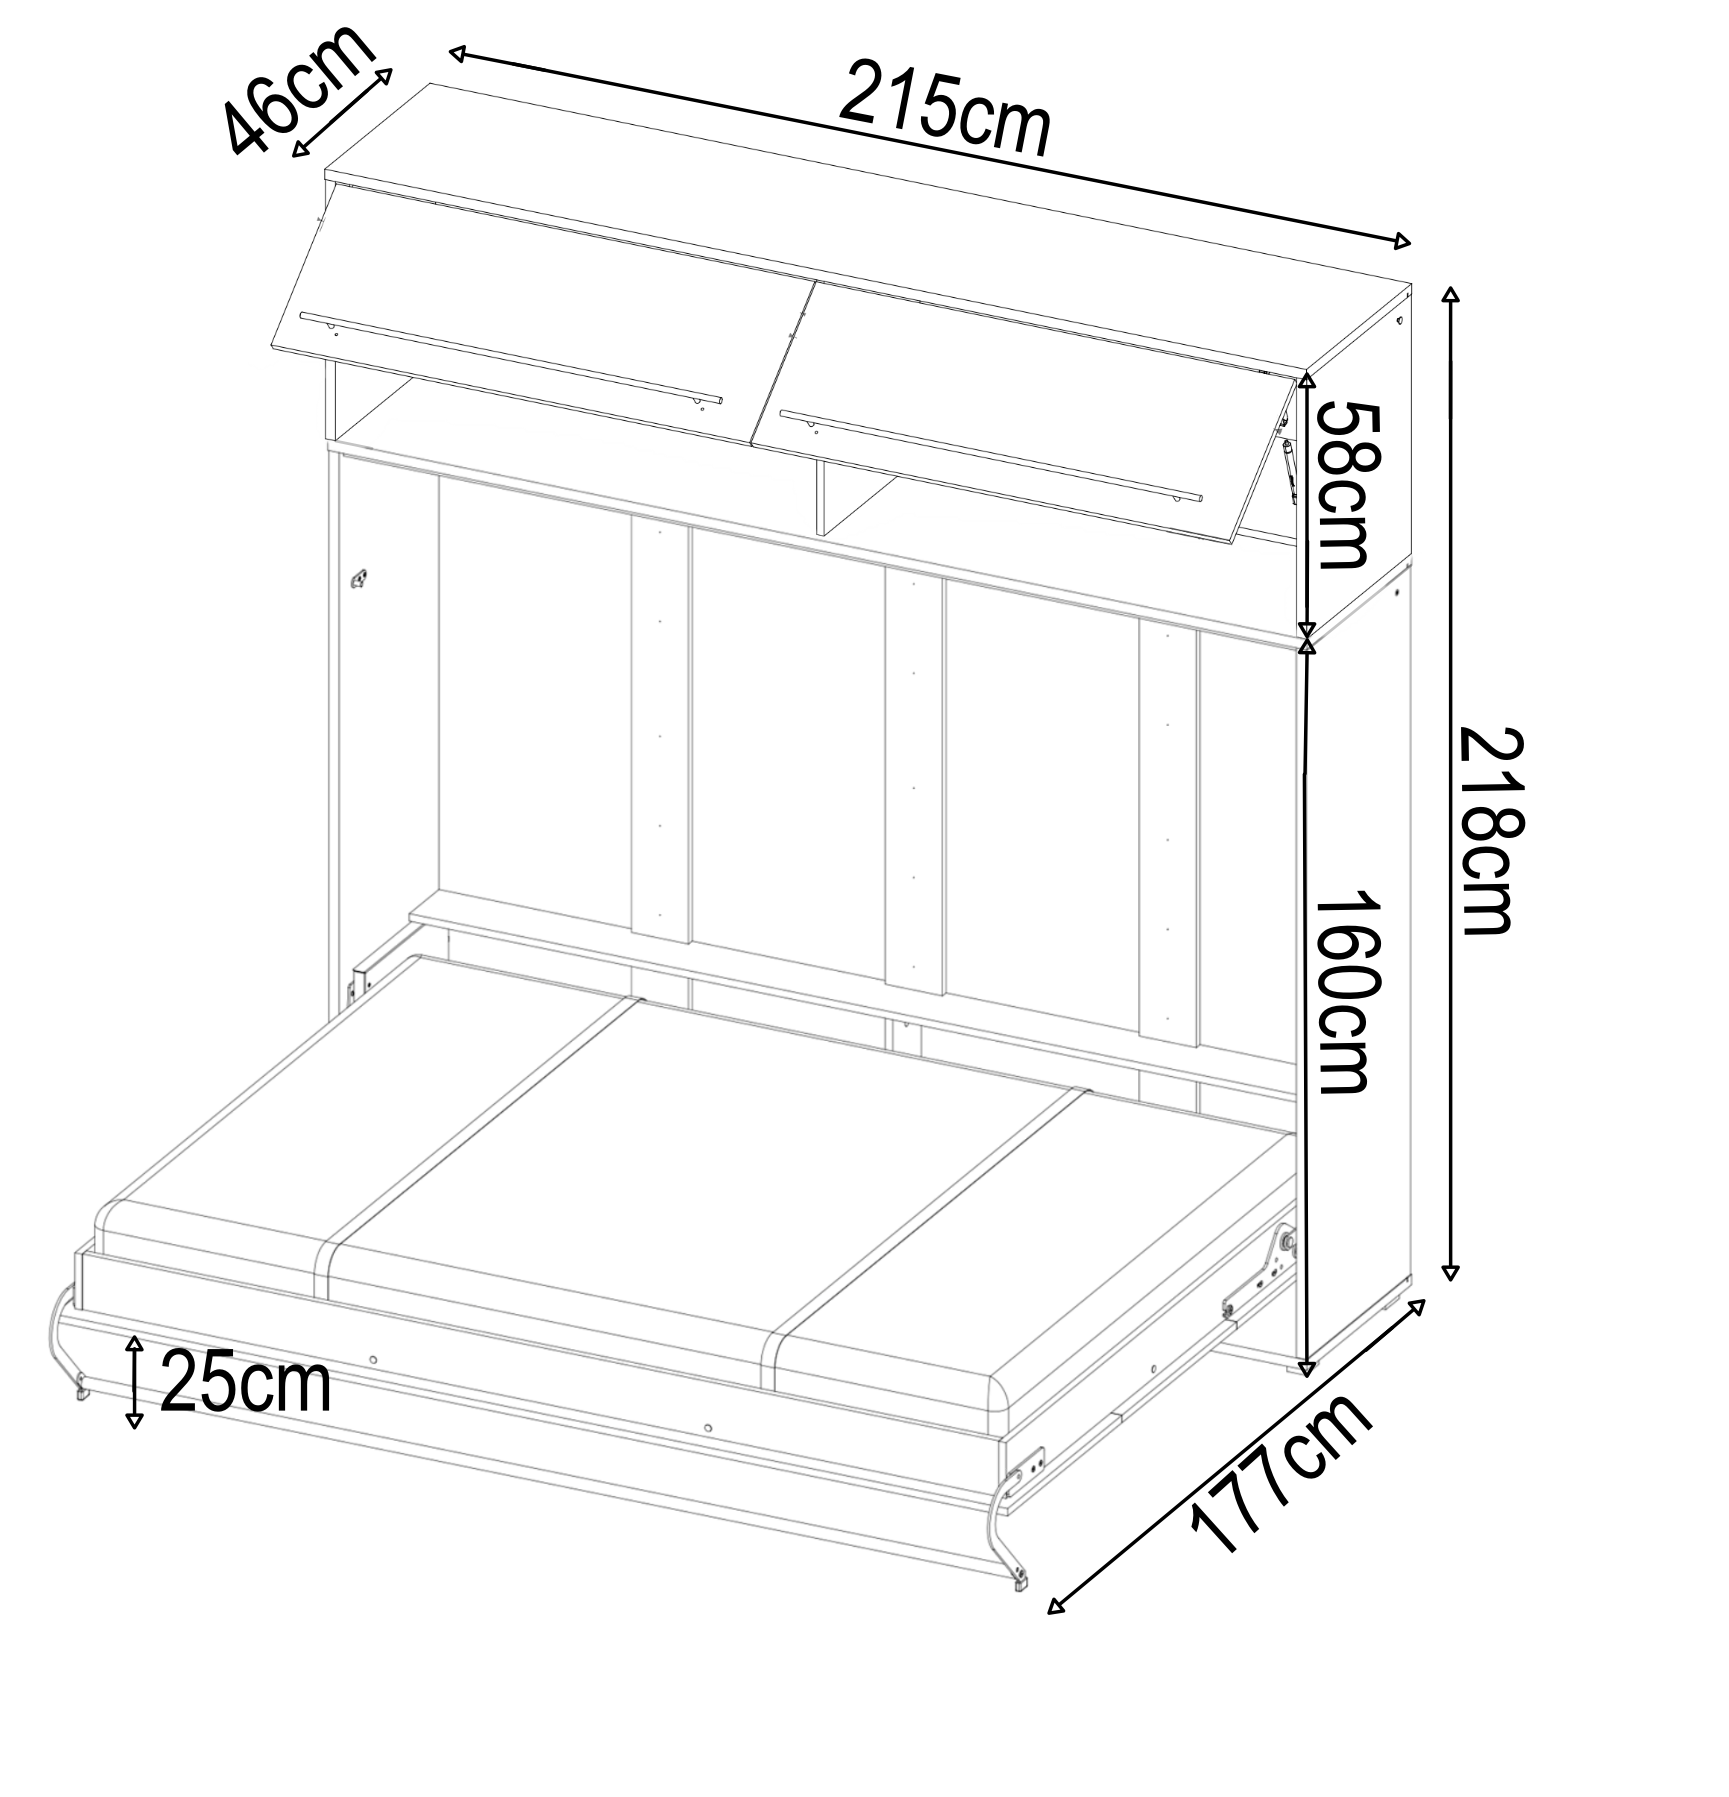 CP-04 Horizontal Wall Bed Concept 140cm with Over Bed Unit-Wall Bed with Storage Unit